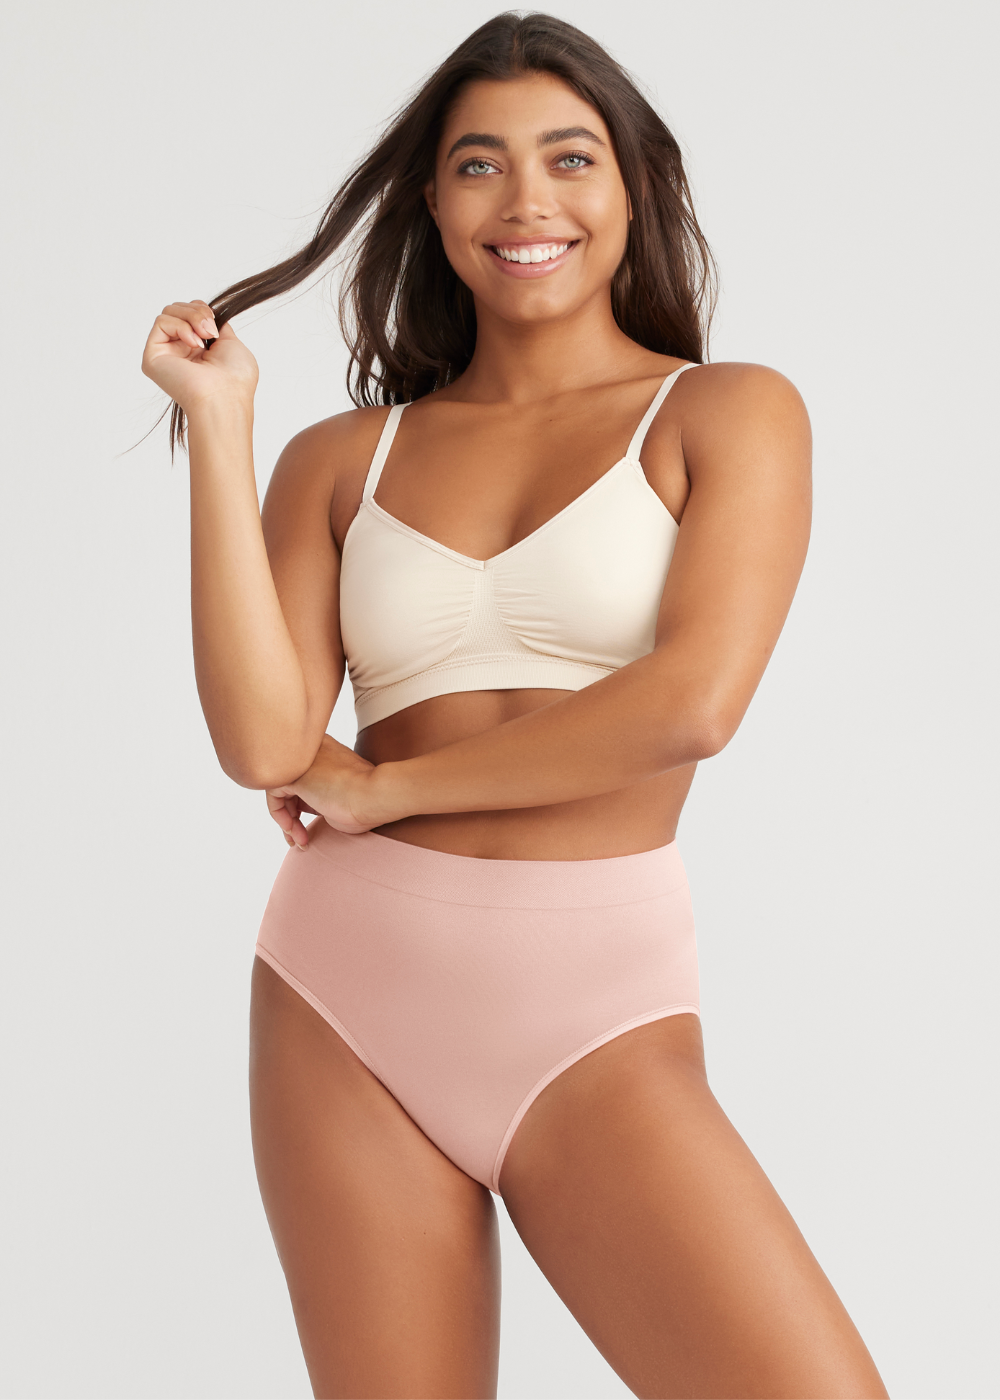 non-shaping retro brief - seamless in Pale Dogwood with emmie t-back bralette - outlast® seamless in Frappe worn by girl with left arm bent and touching right elbow, with right hand twirling hair. Yummie.